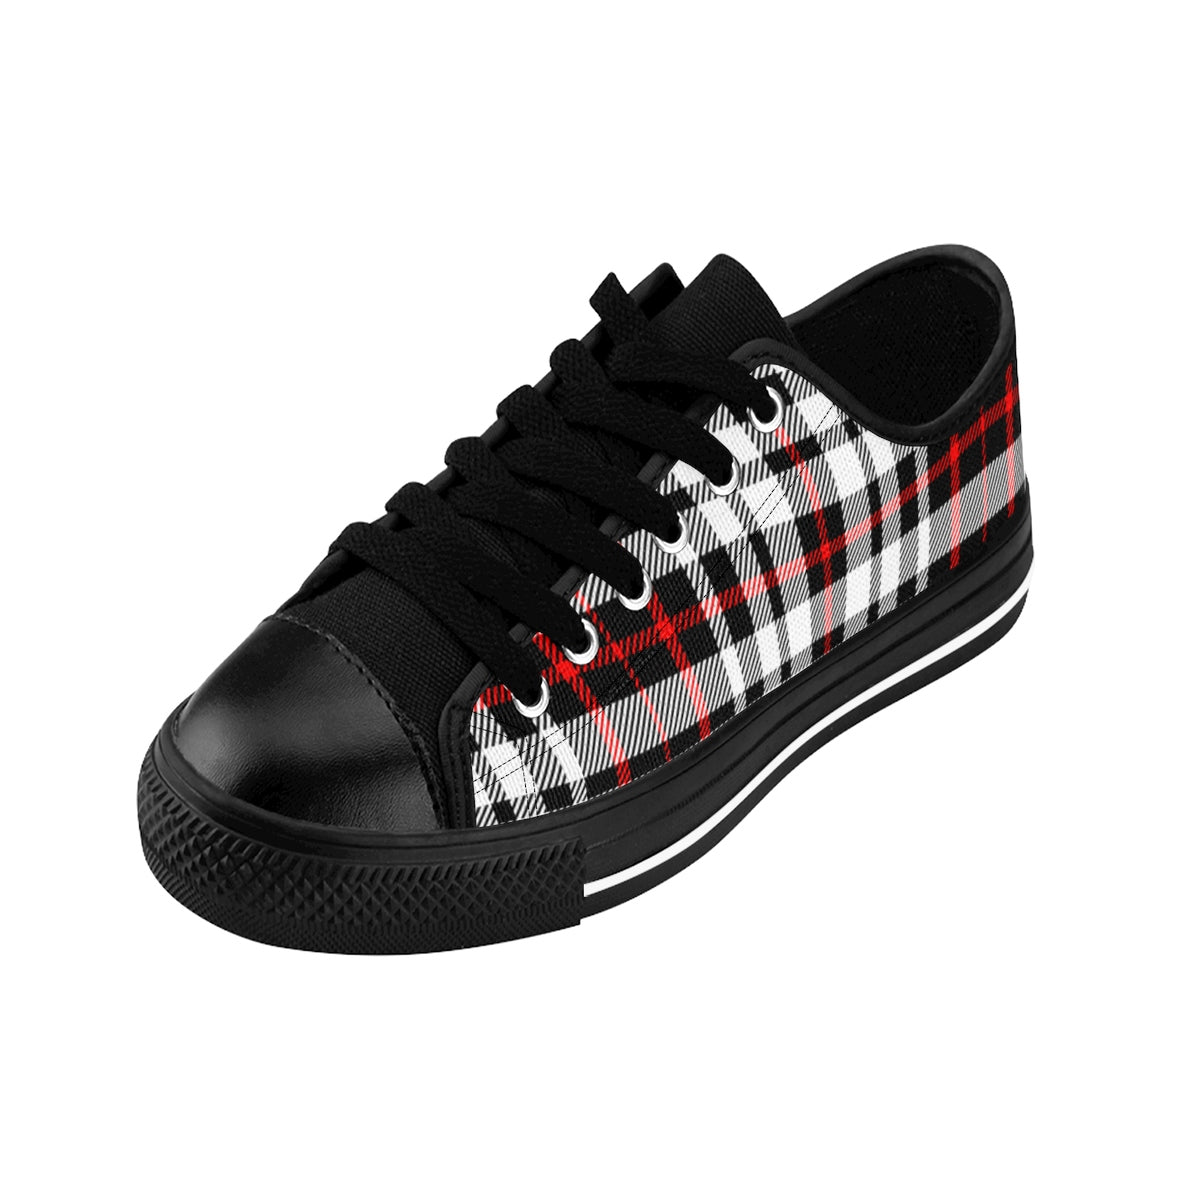 Wicked/Plaid/ Red /Women's Sneakers